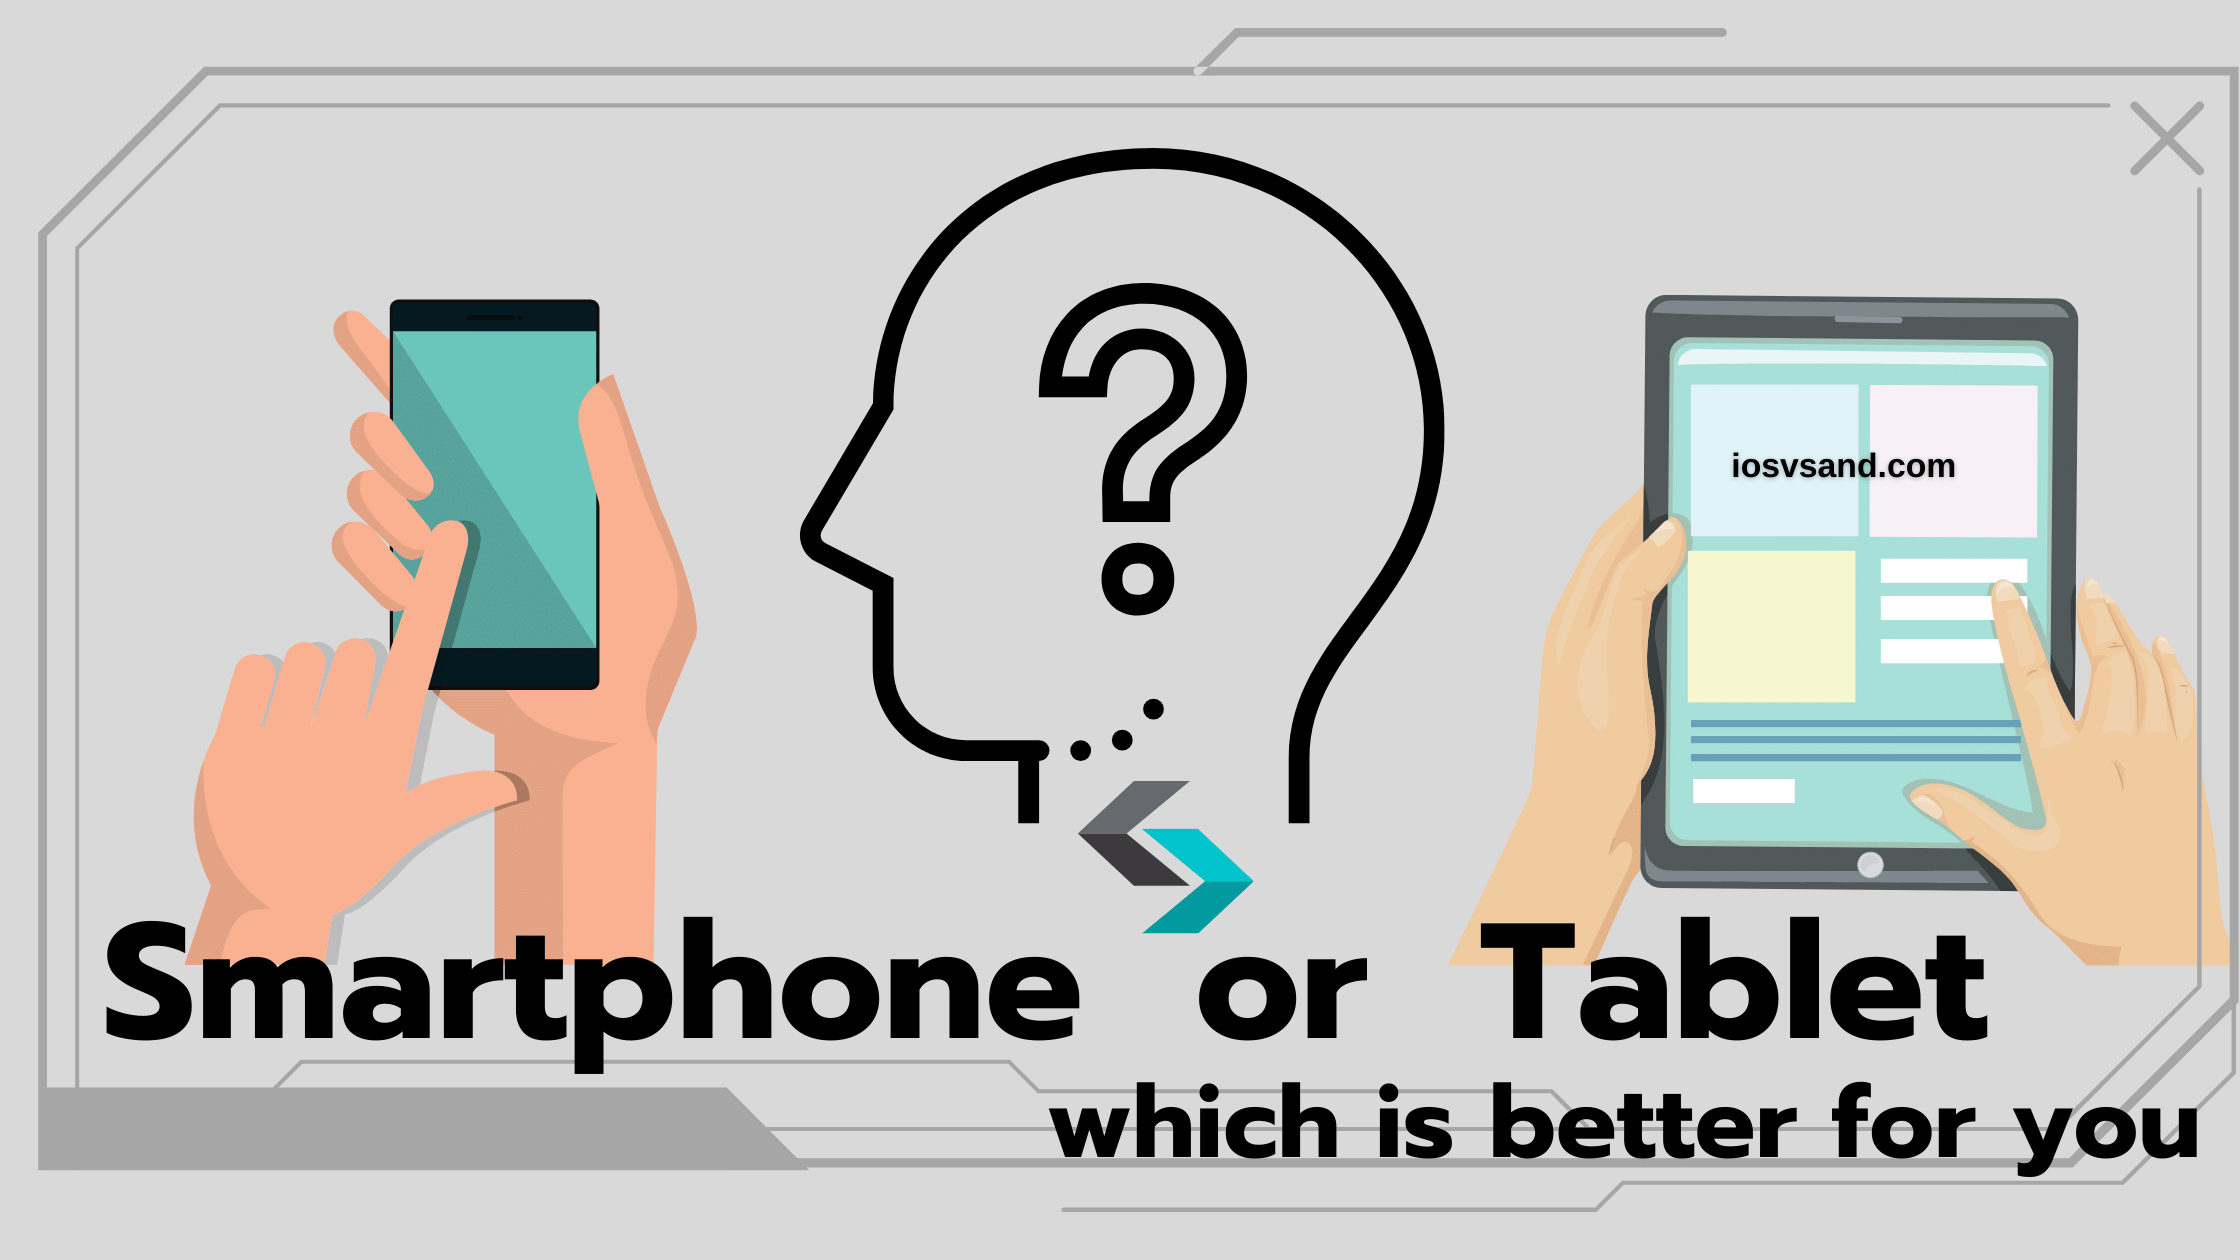 Smartphone or tablet which is better for you